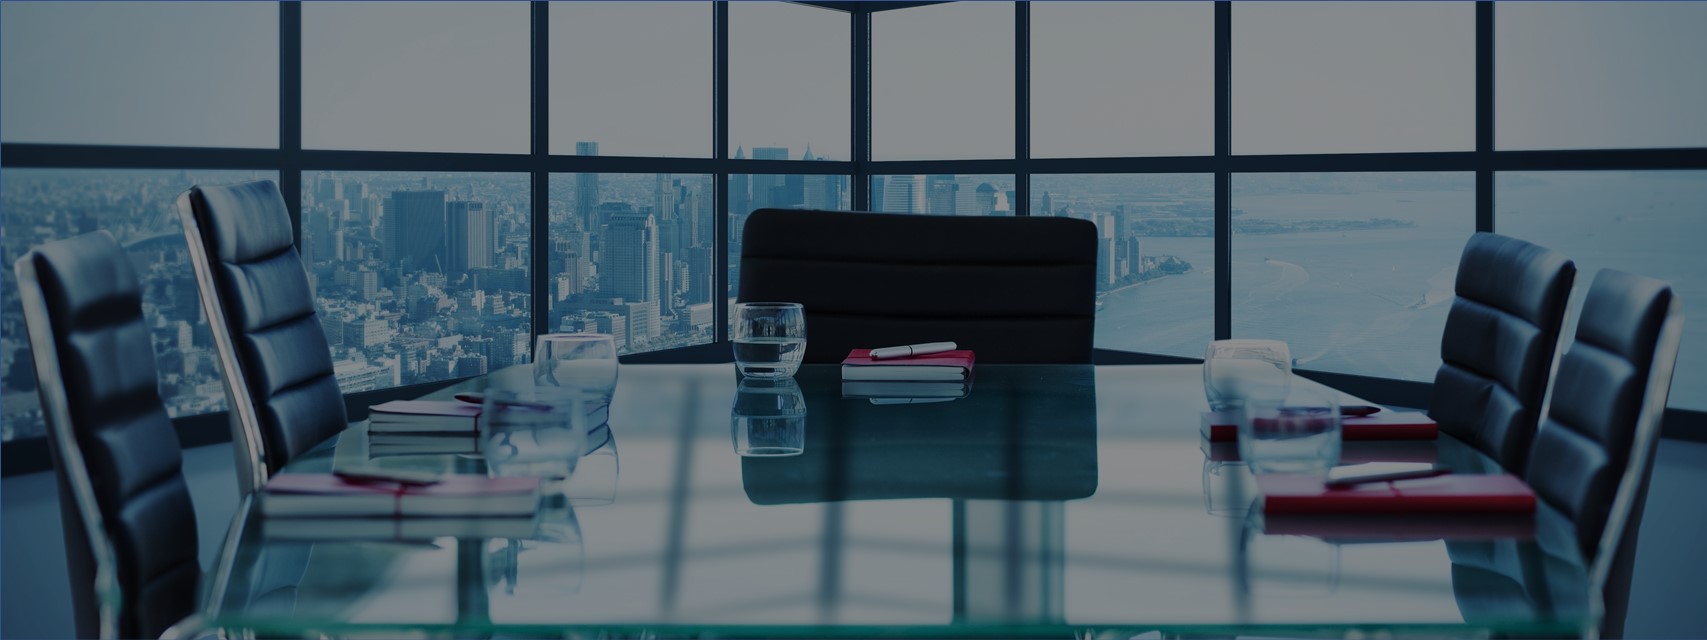 Image of a boardroom with NY cityscape seen in background through large window.